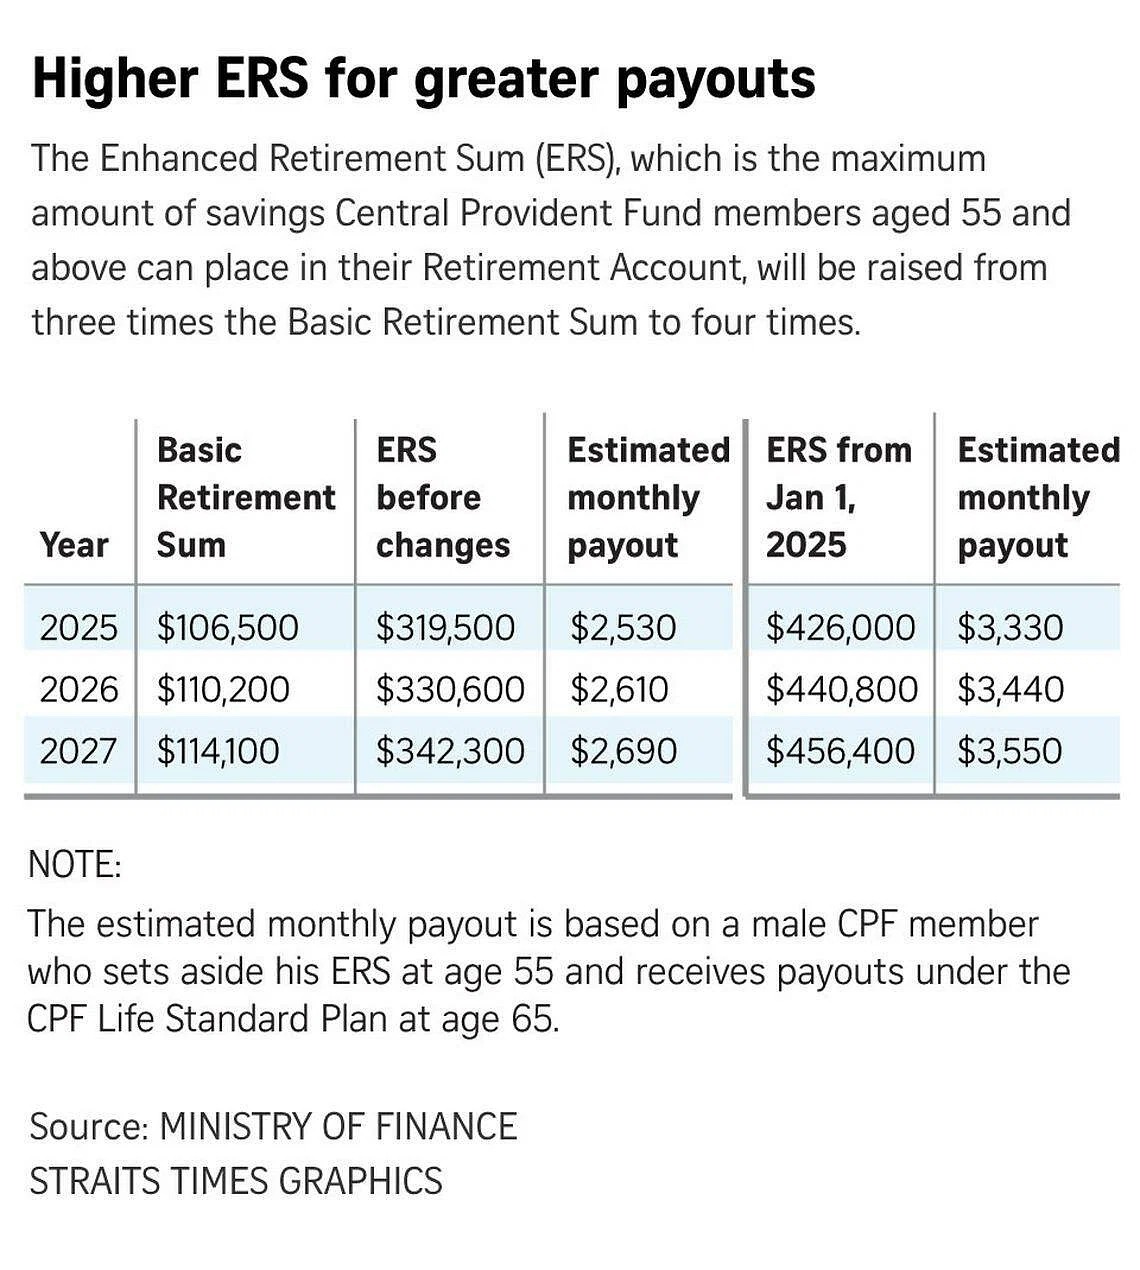 Higher ERS for greater payouts